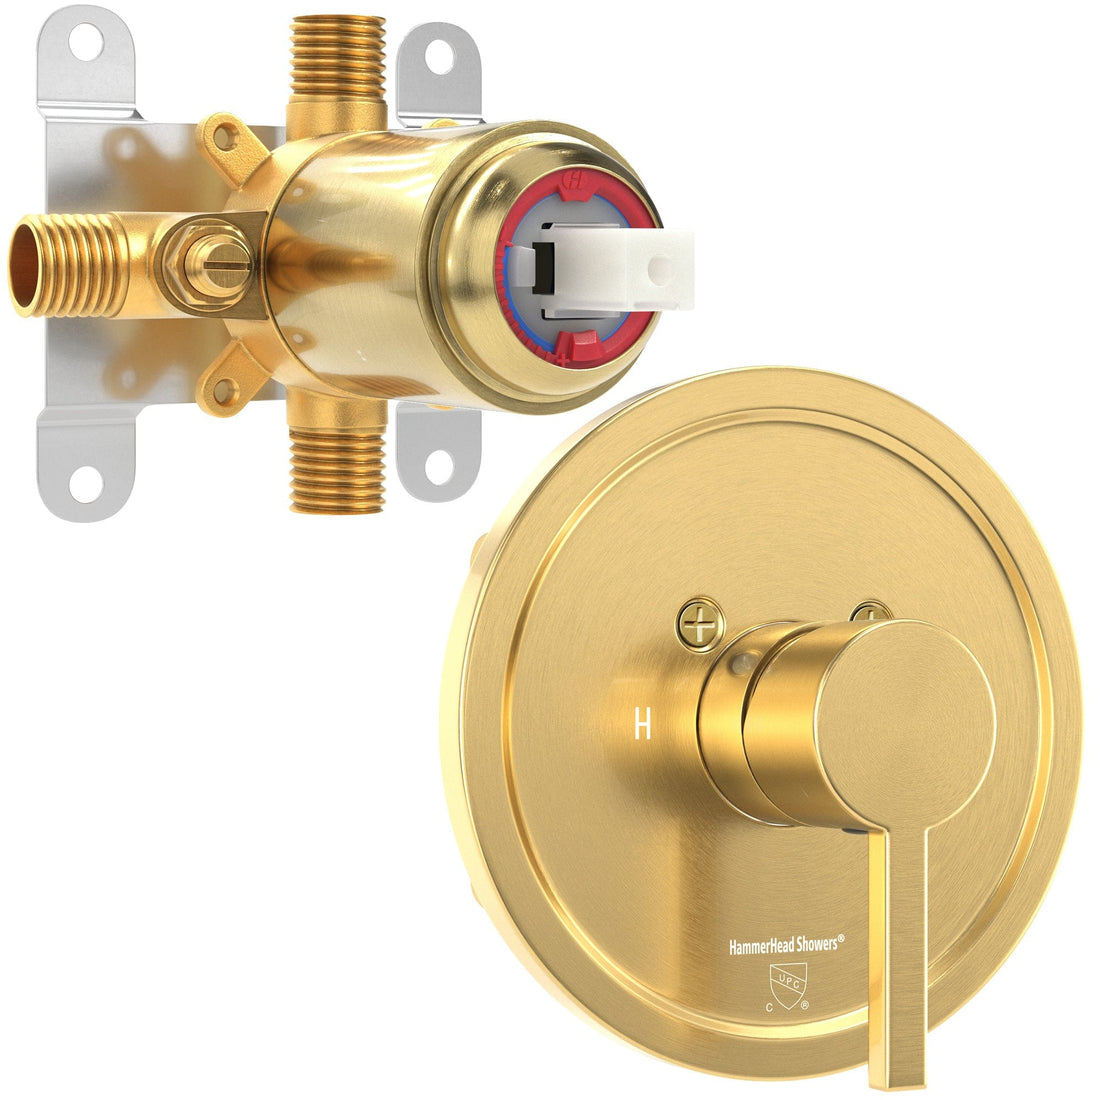 Main Image with Valve and Trim - All Metal 1-Handle Tub and Shower Valve with Trim Kit Brushed Gold - The Shower Head Store